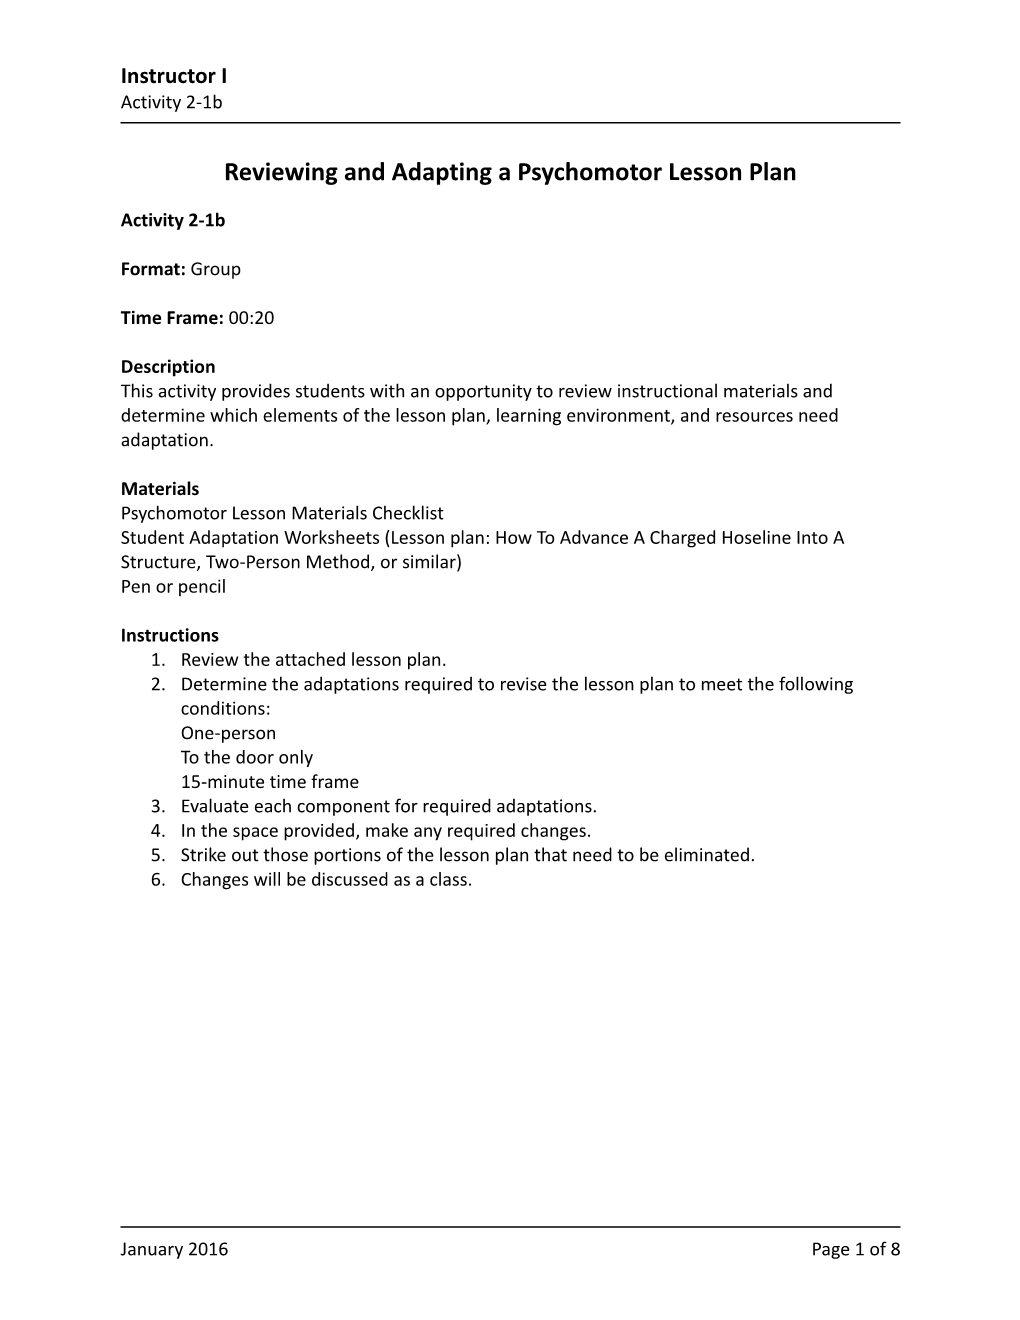 Reviewing and Adapting a Psychomotor Lesson Plan